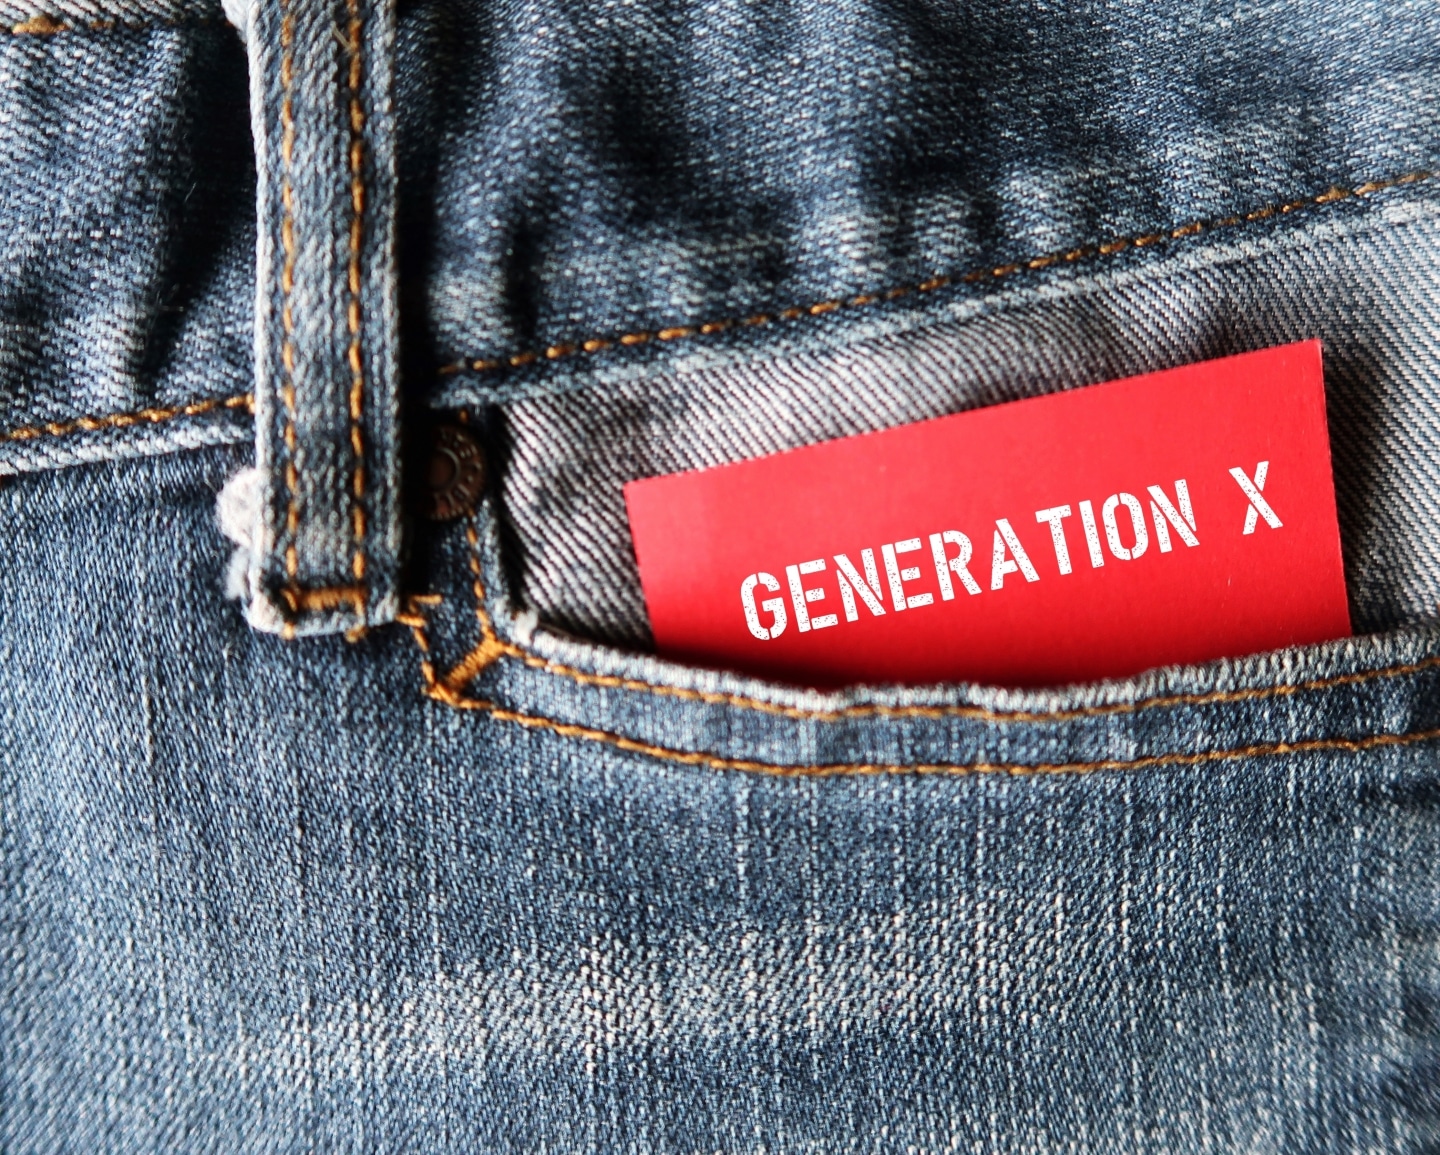 5 Gen X Stats Marketers Need to Know